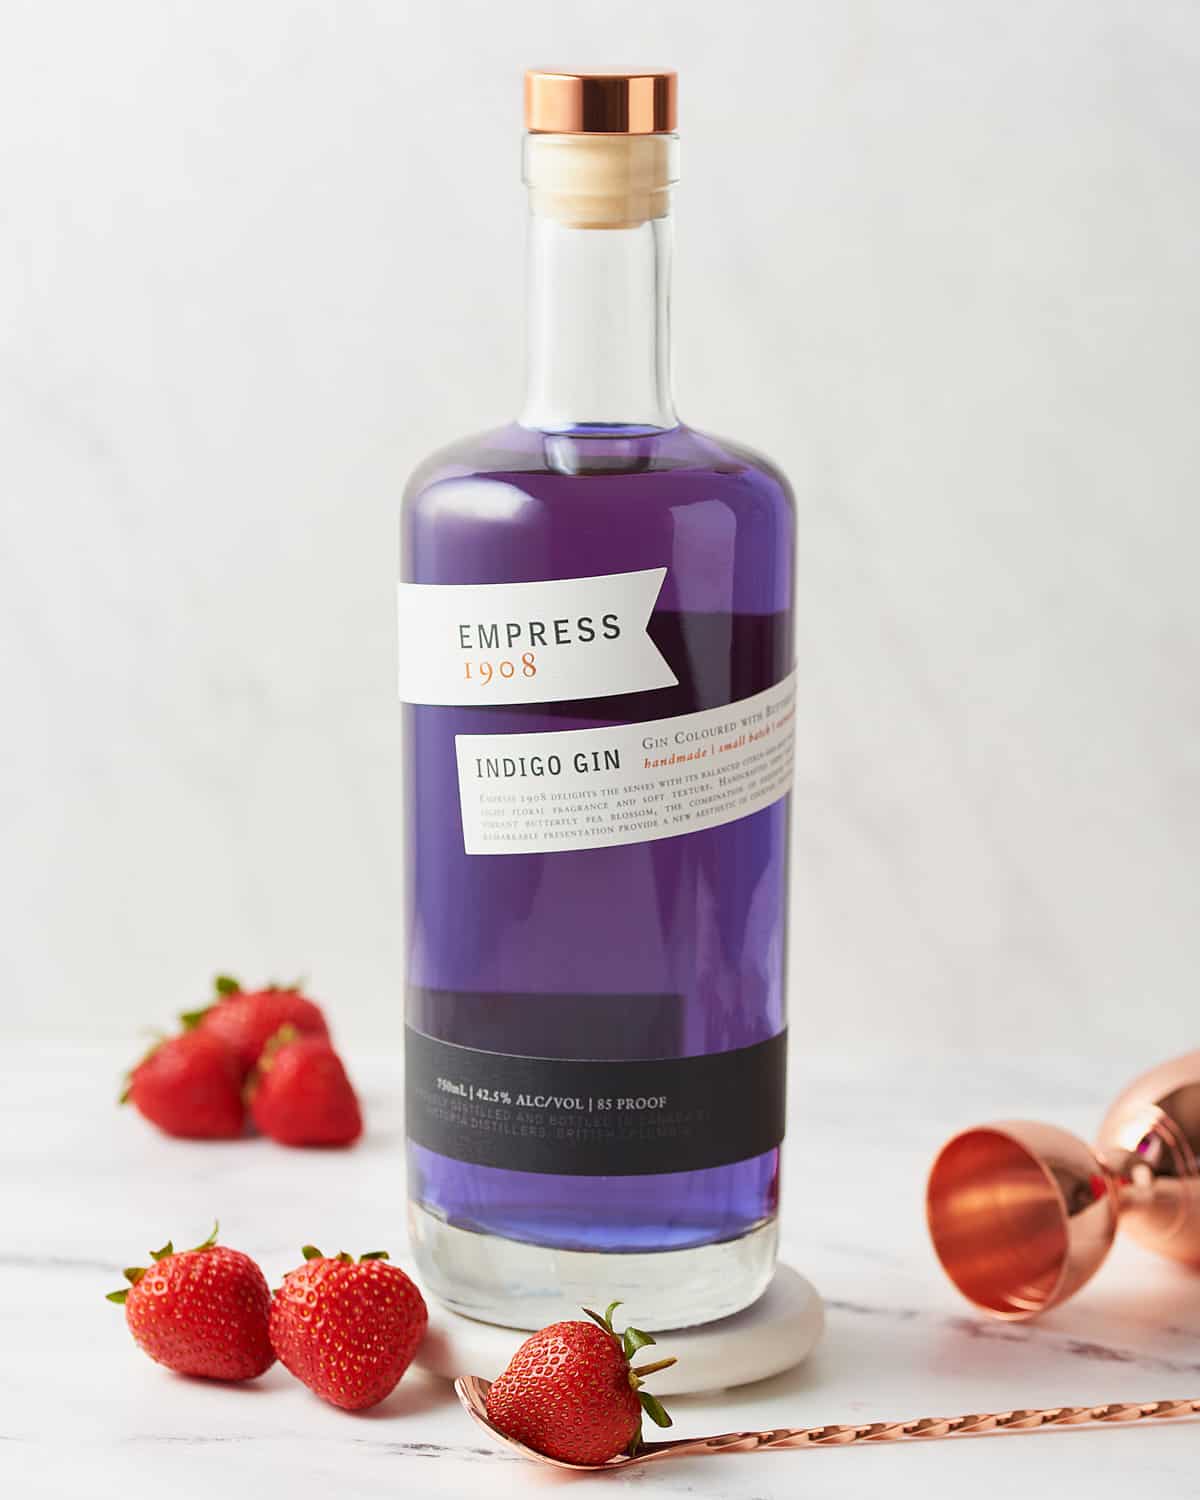 Bottle of Empress 1908 Gin with strawberries.